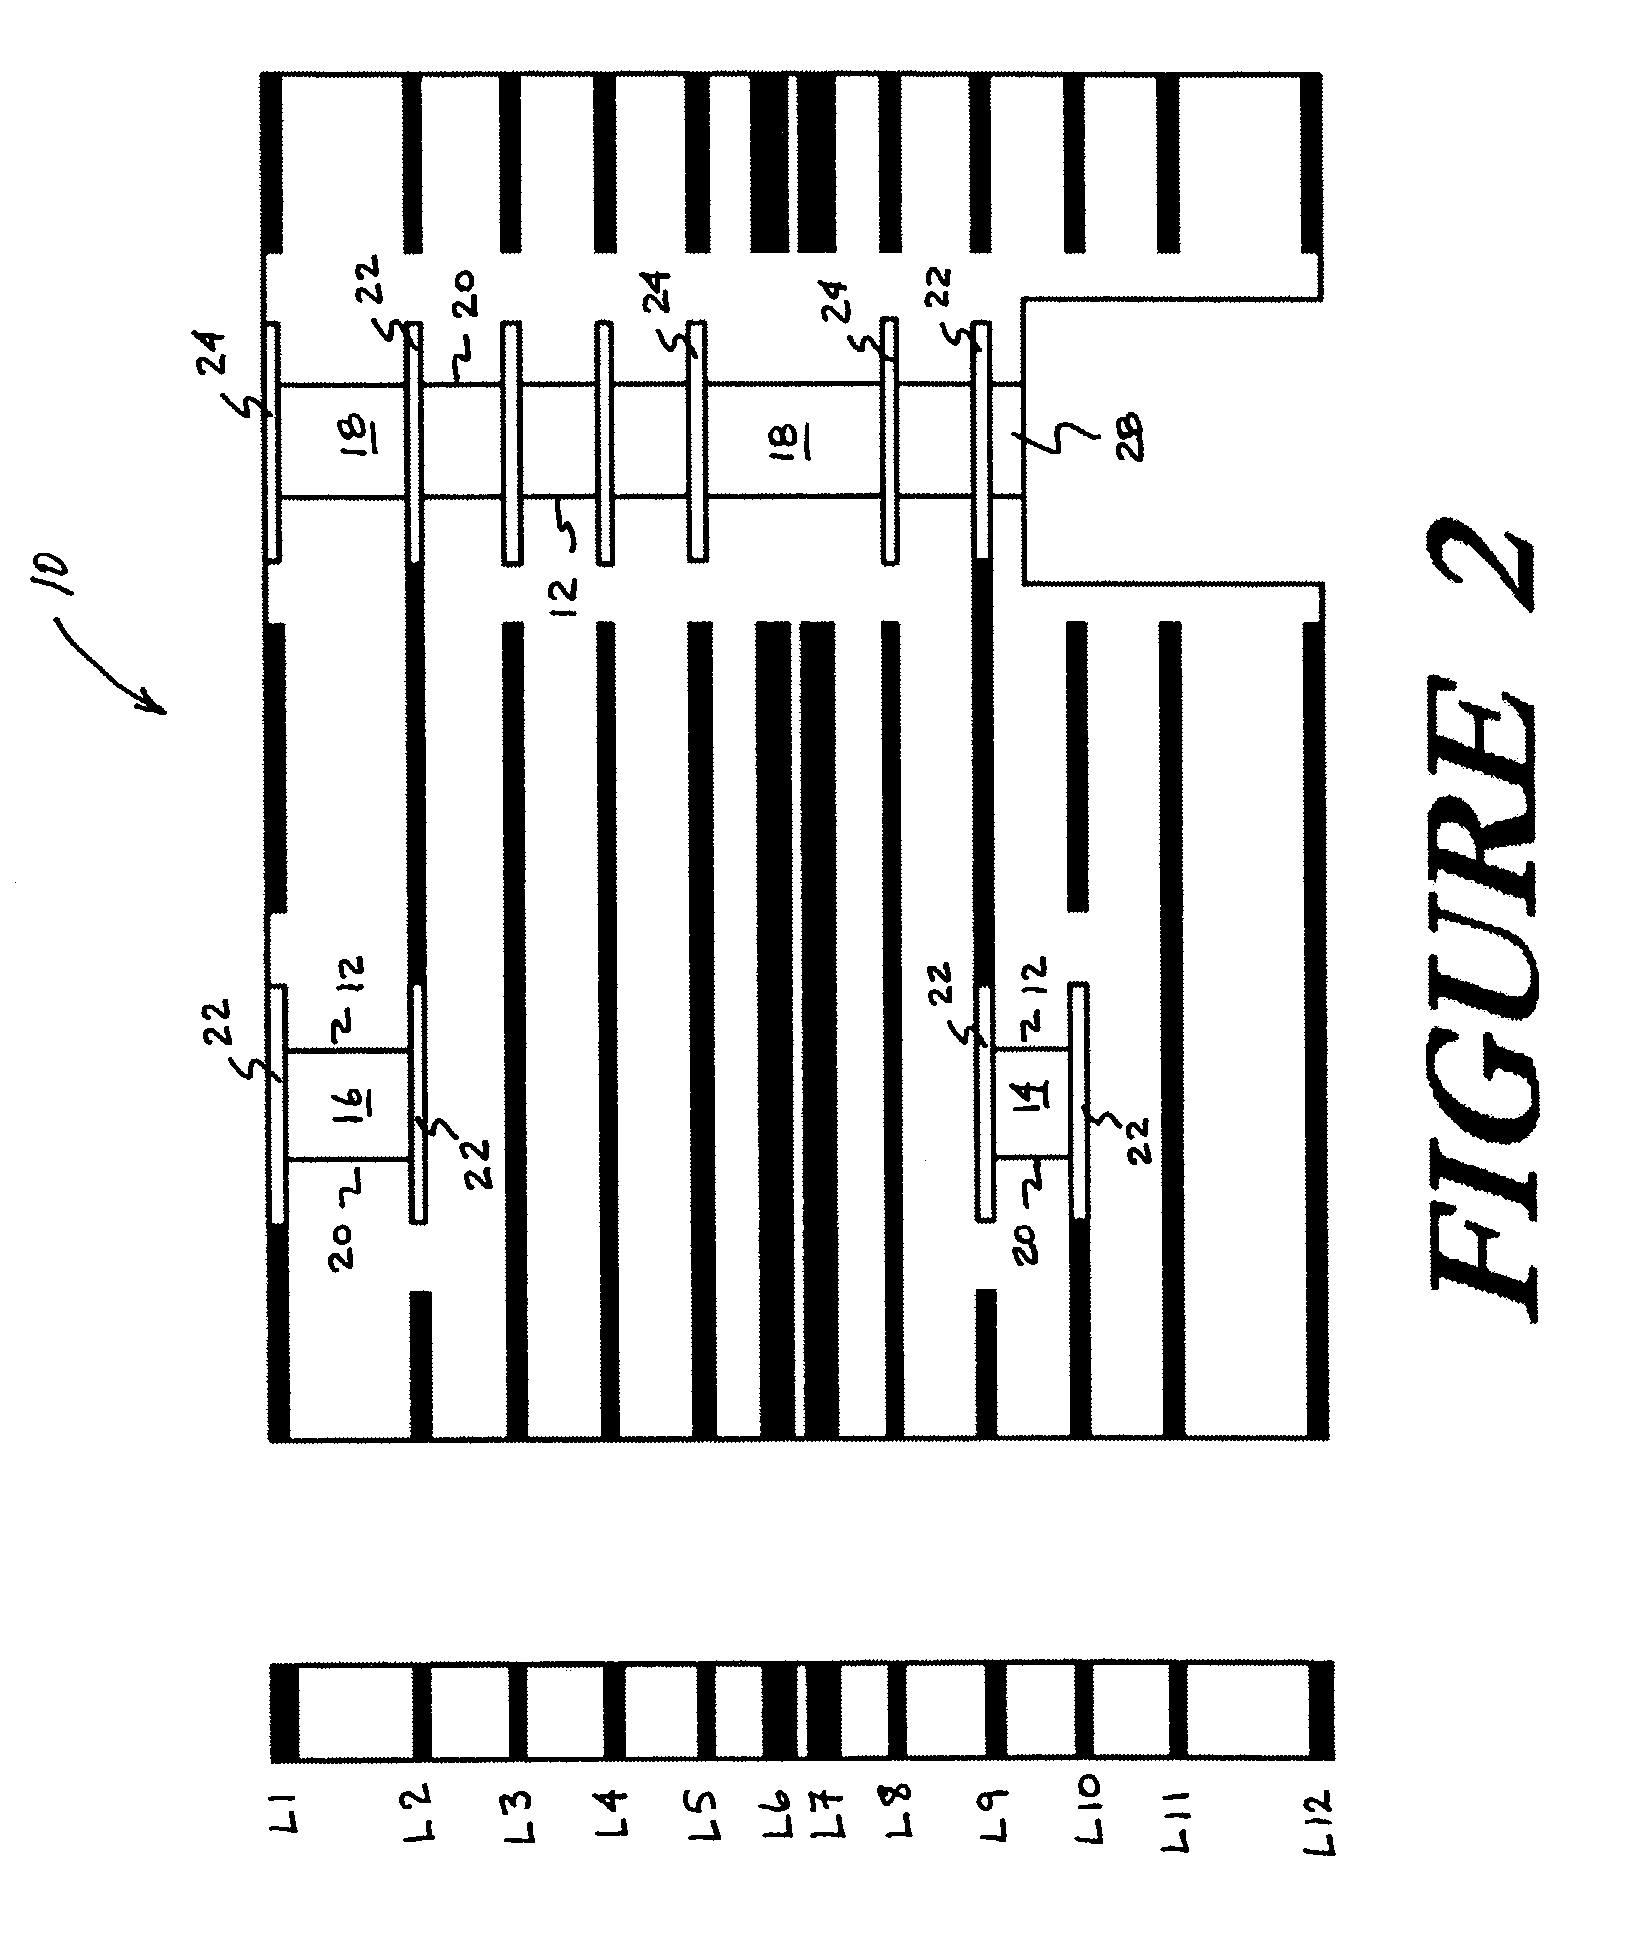 Method for optimizing high frequency performance of via structures